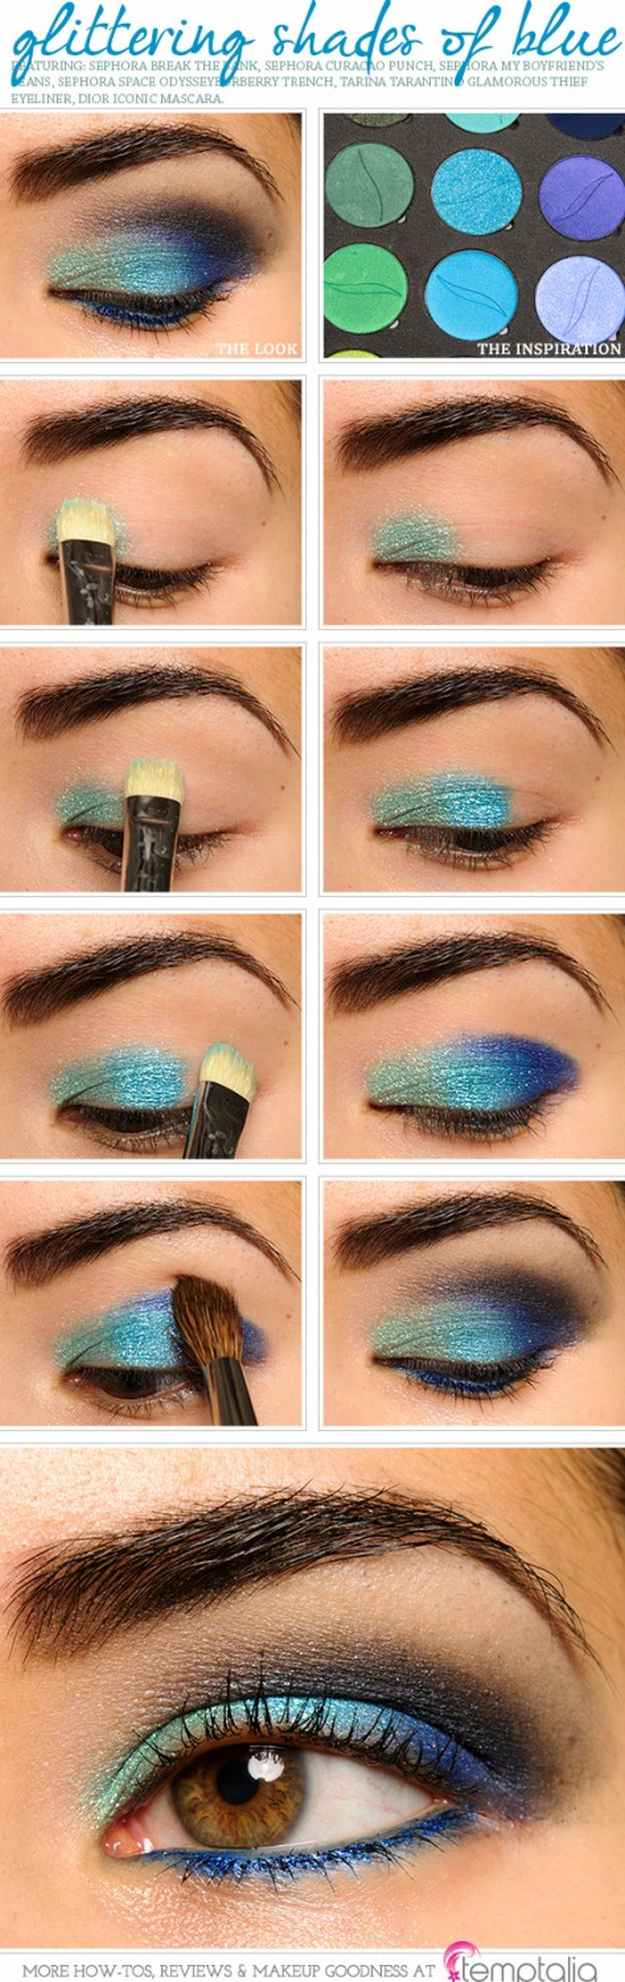 Pretty Makeup For Brown Eyes Gorgeous Easy Makeup Tutorials For Brown Eyes Makeup Tutorials